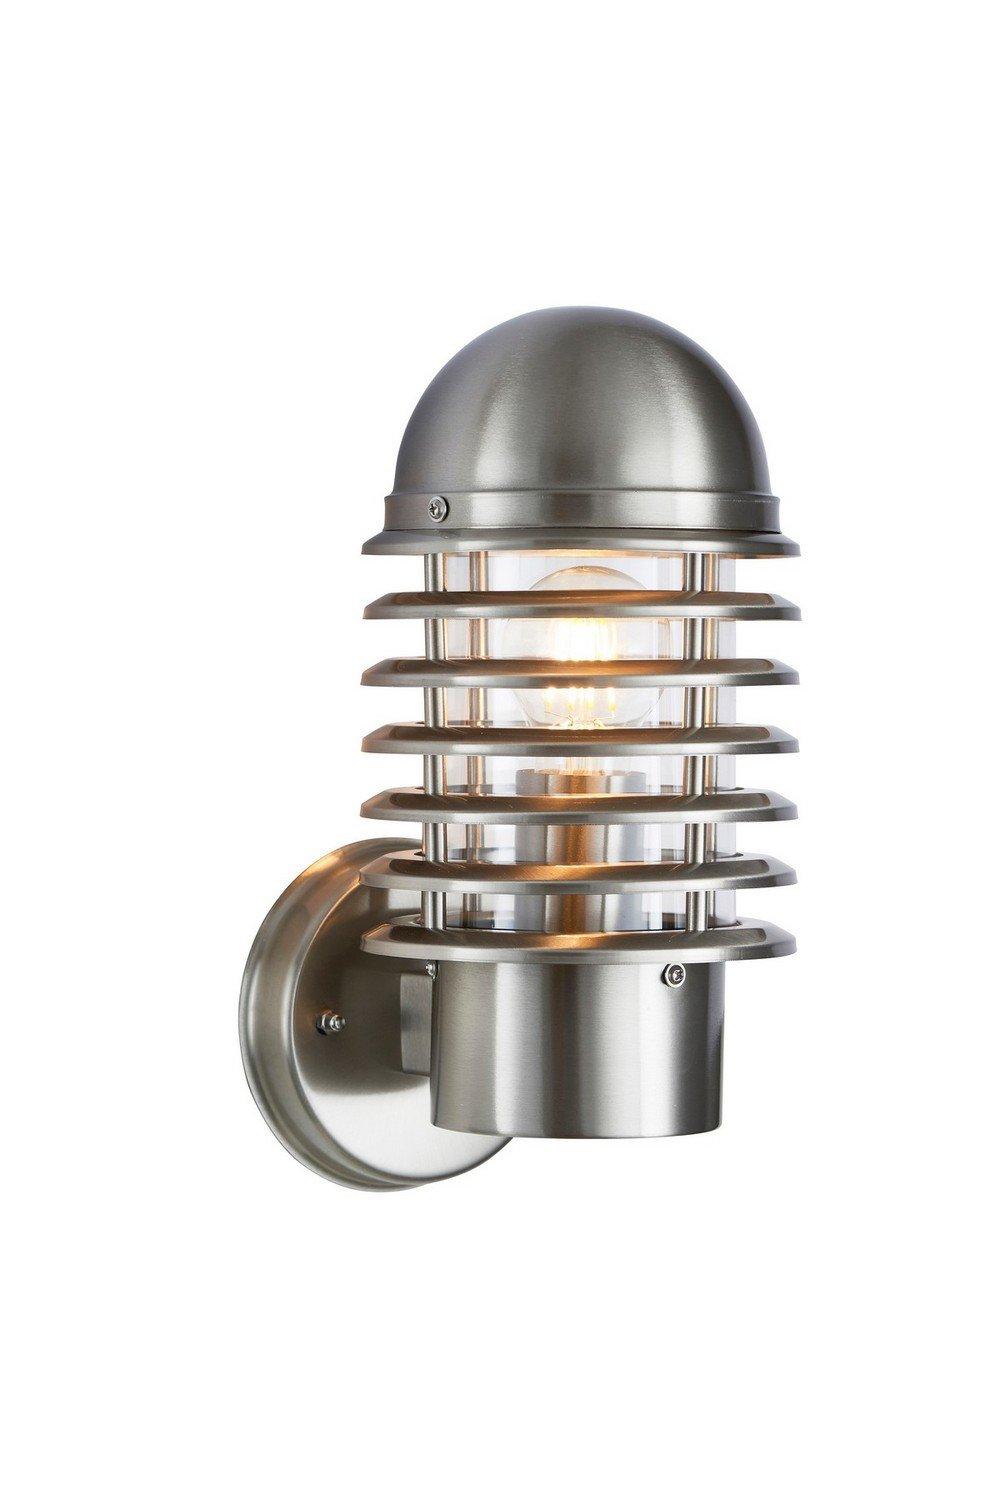 Louvre 1 Light Outdoor Wall Light Polished Stainless Steel Clear Polycarbonate IP44 E27